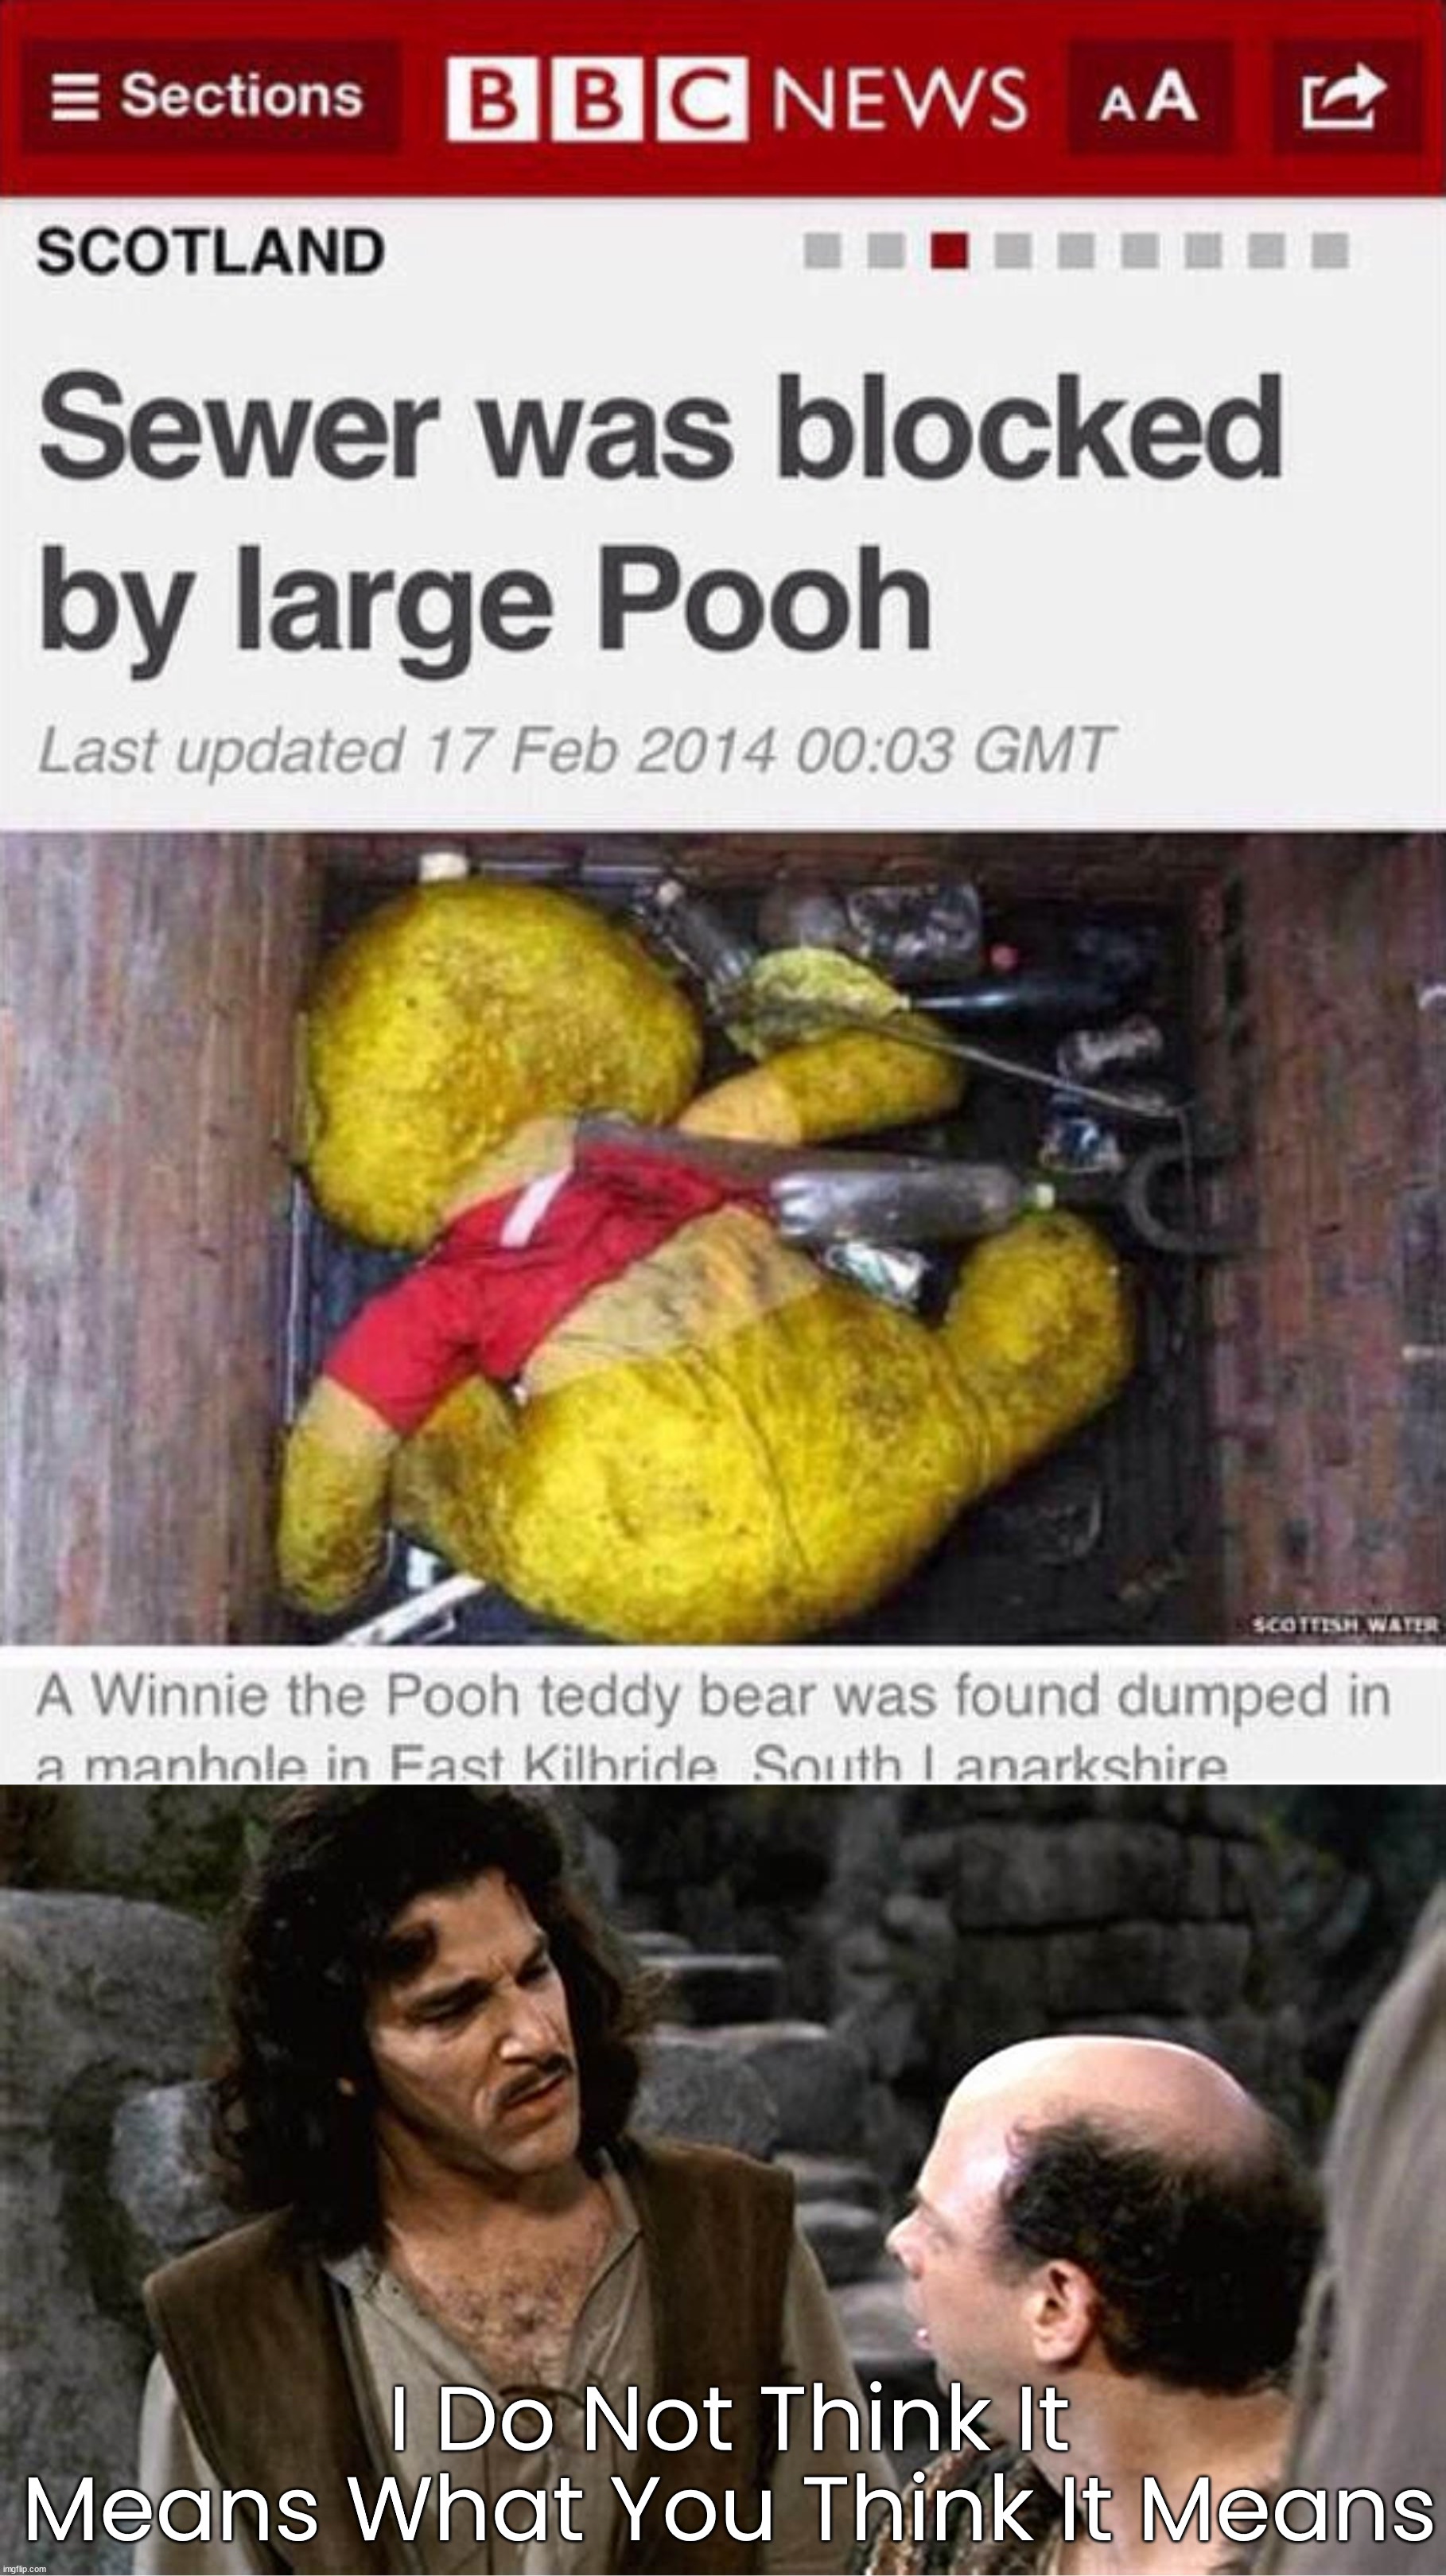 Not that kind of poo | I Do Not Think It Means What You Think It Means | image tagged in i do not think it means what you think it means,winnie the pooh,blocked,overthinking | made w/ Imgflip meme maker